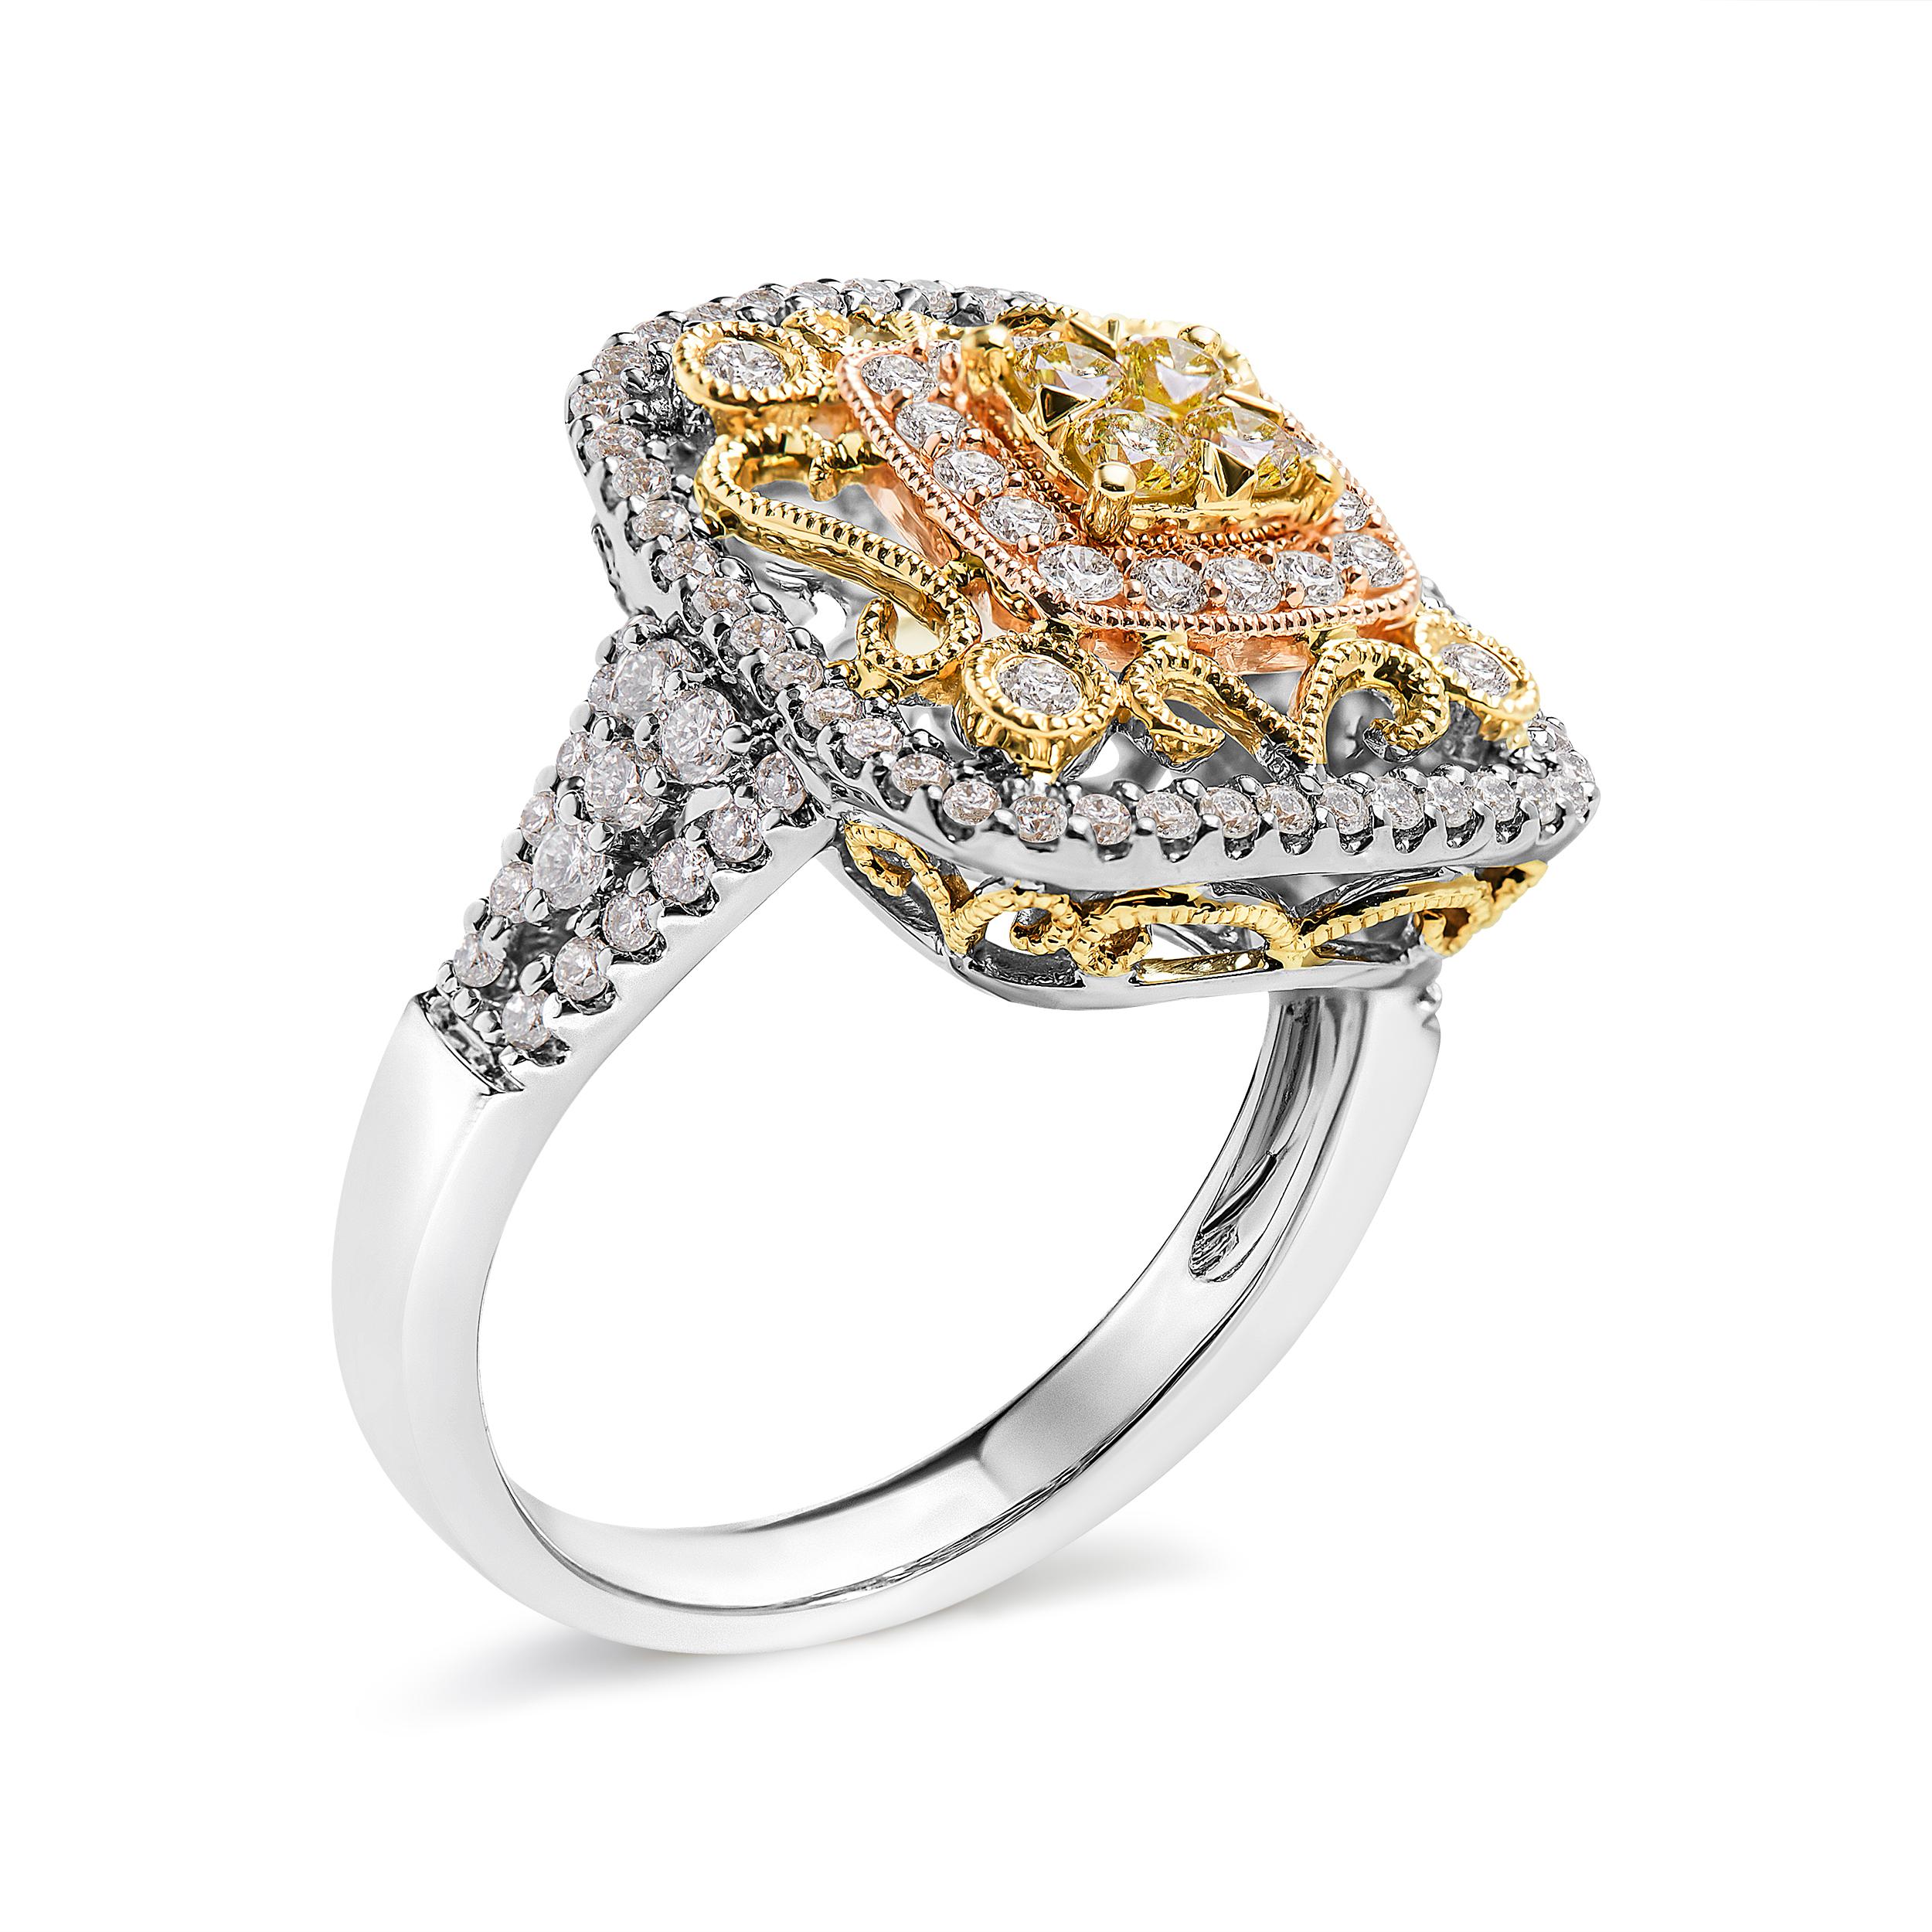 Modern 14K Tri-Toned Gold 1.0 Carat Diamond Halo and Milgrain Cocktail Cluster Ring